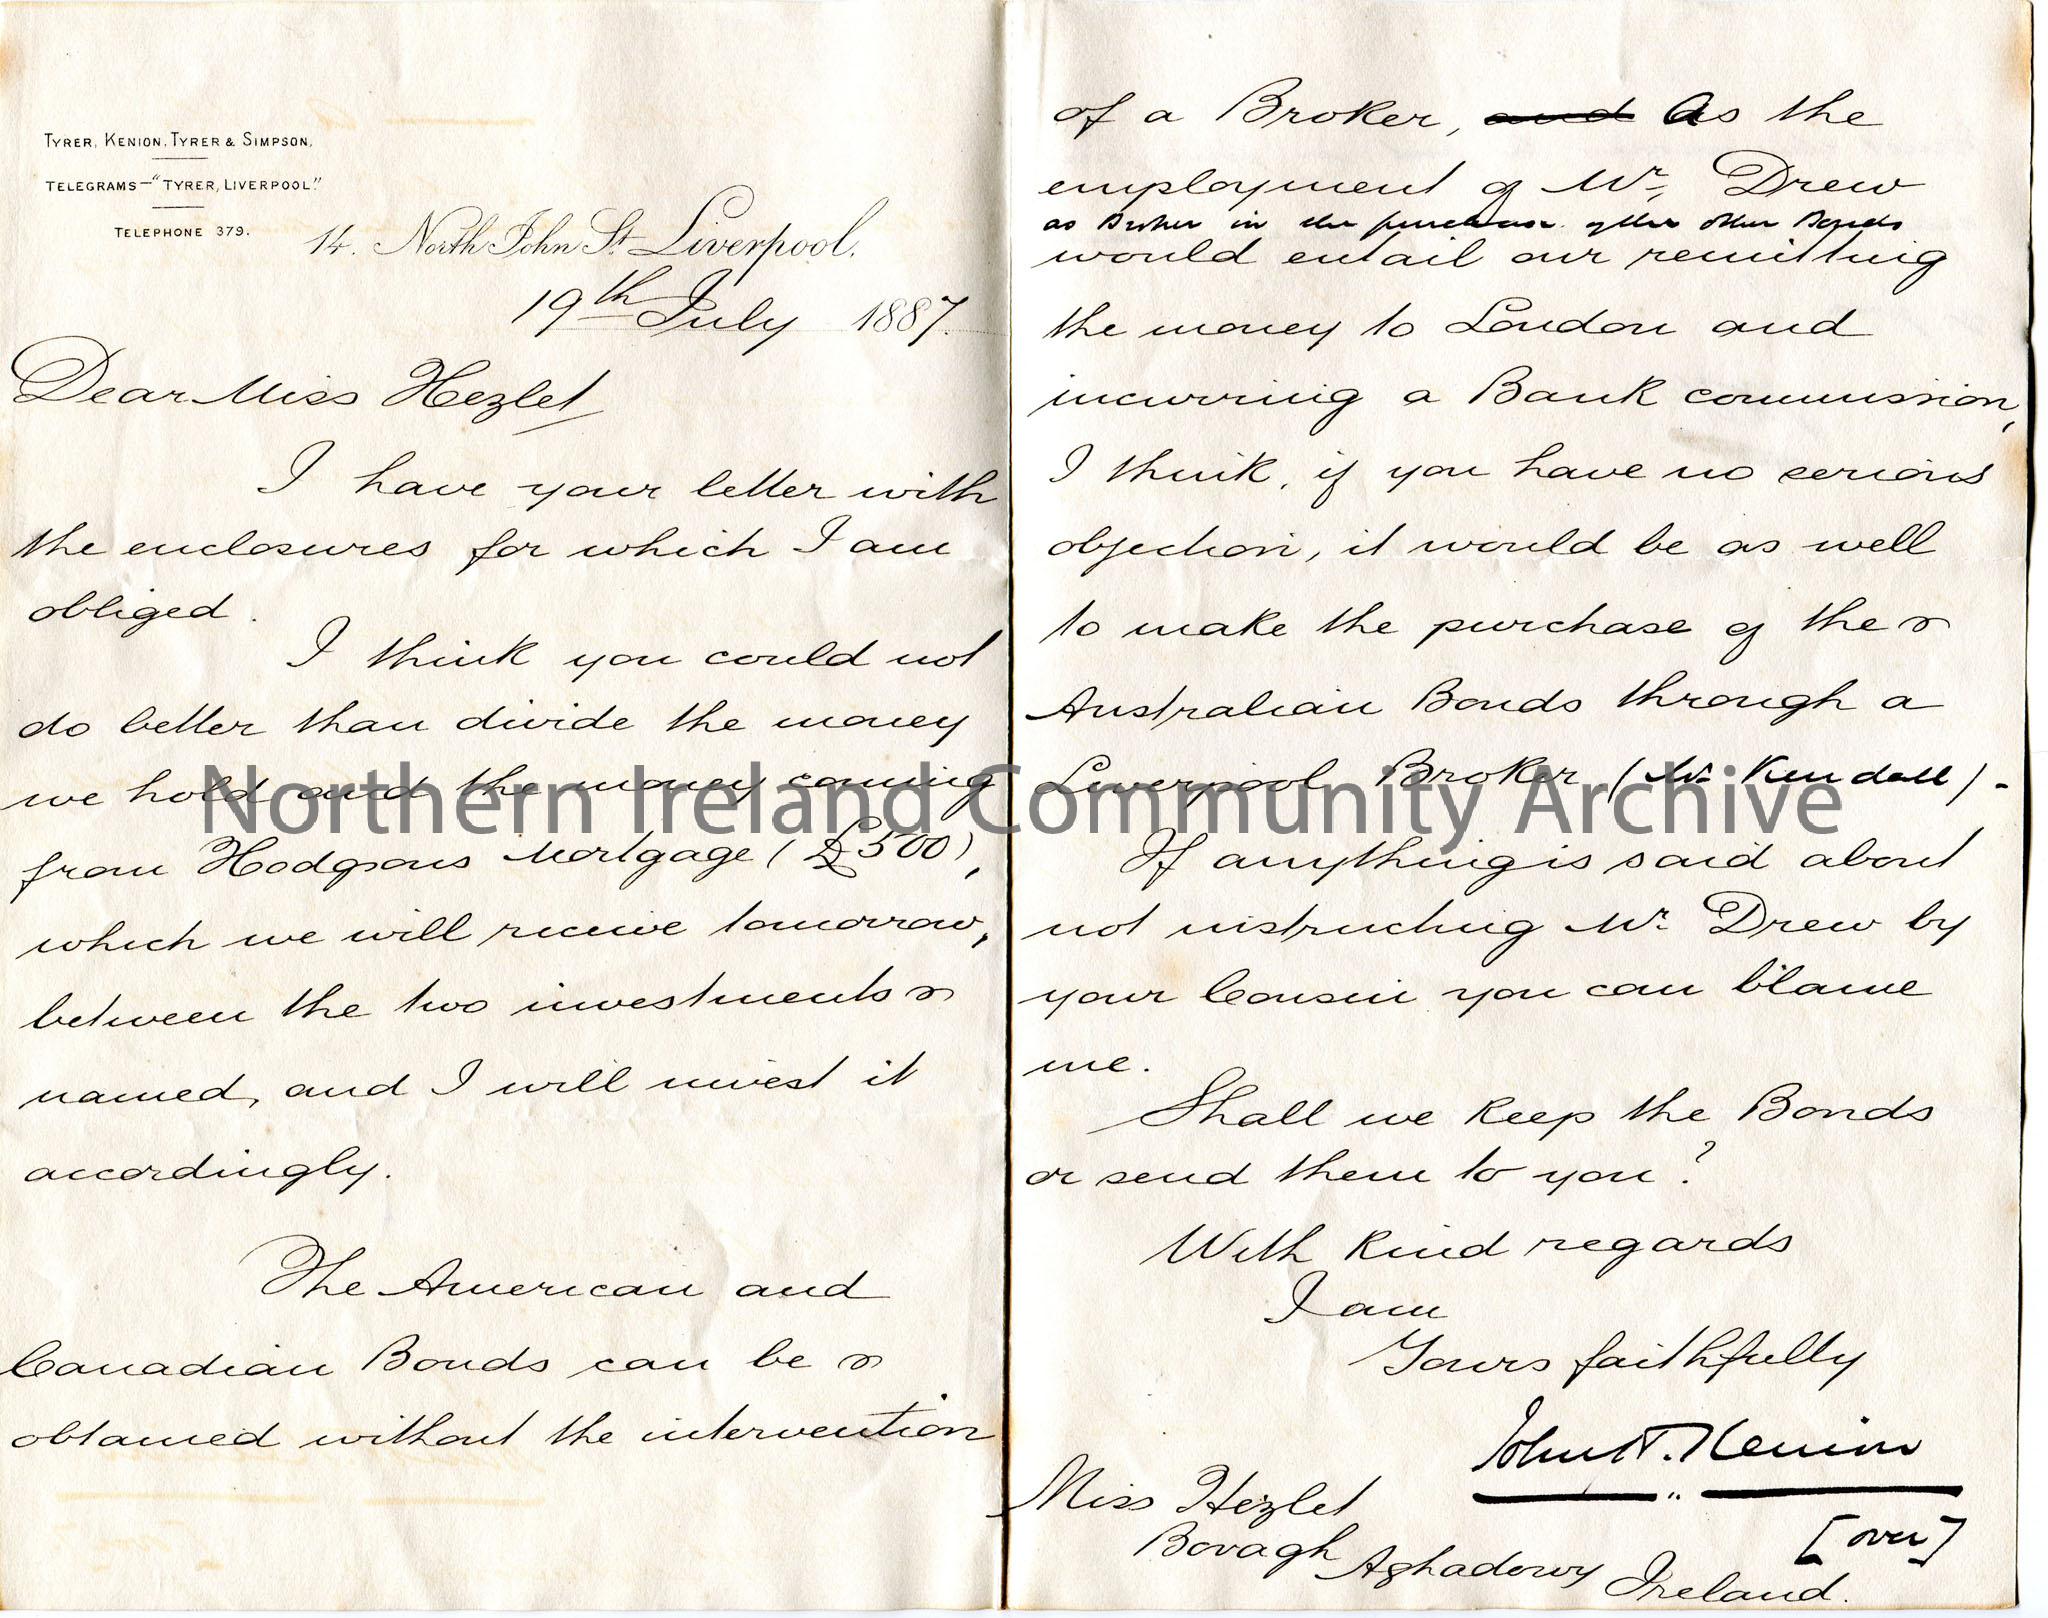 Handwritten letter to Miss Hezlet at Bovagh, Aghadowey, Ireland. Agrees with Miss Hezlet on her instructions for investing money. Advises Miss Hezlet …